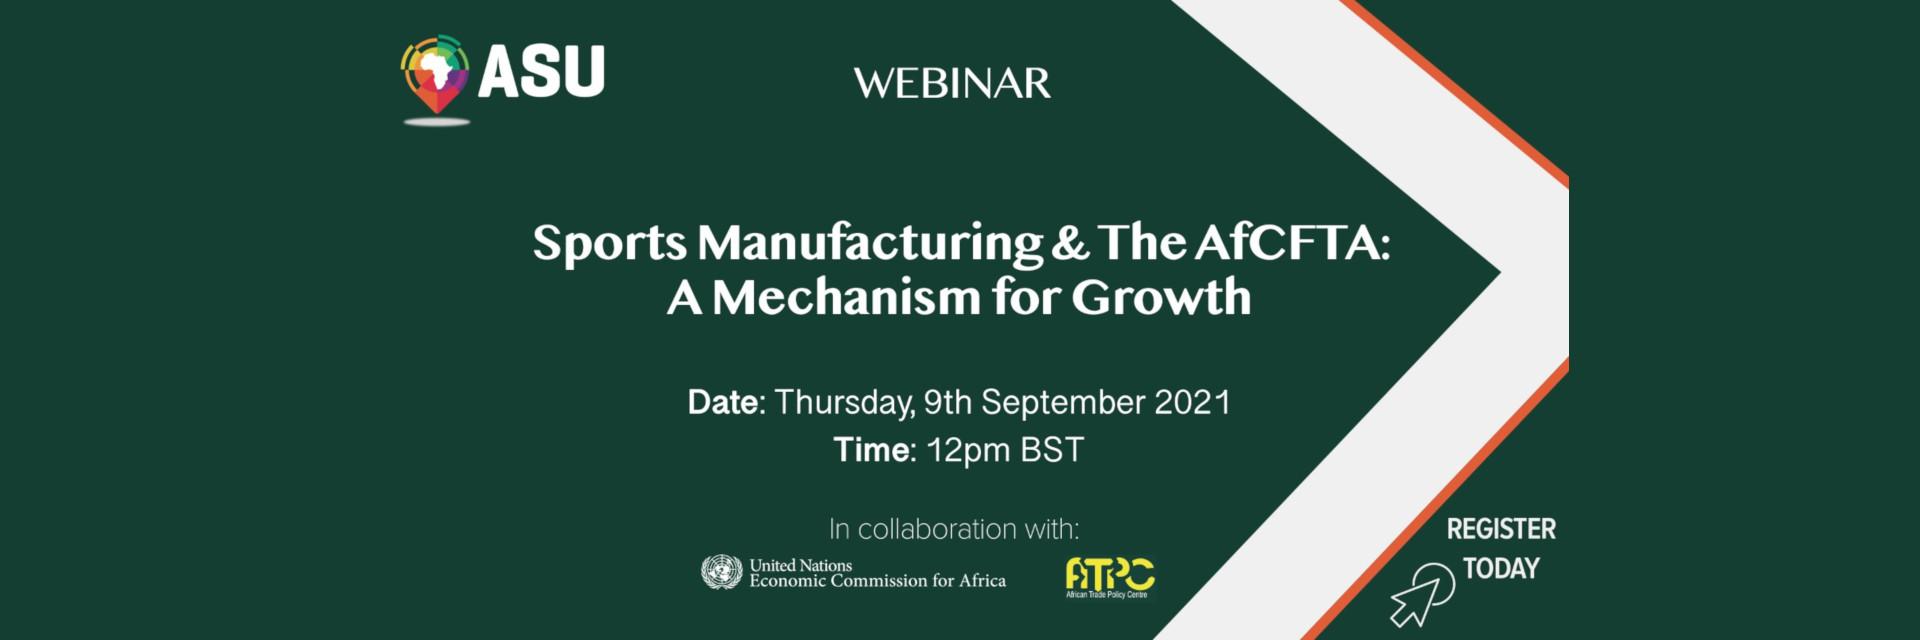 Sports Manufacturing & The AfCFTA: A Mechanism for Growth Webinar